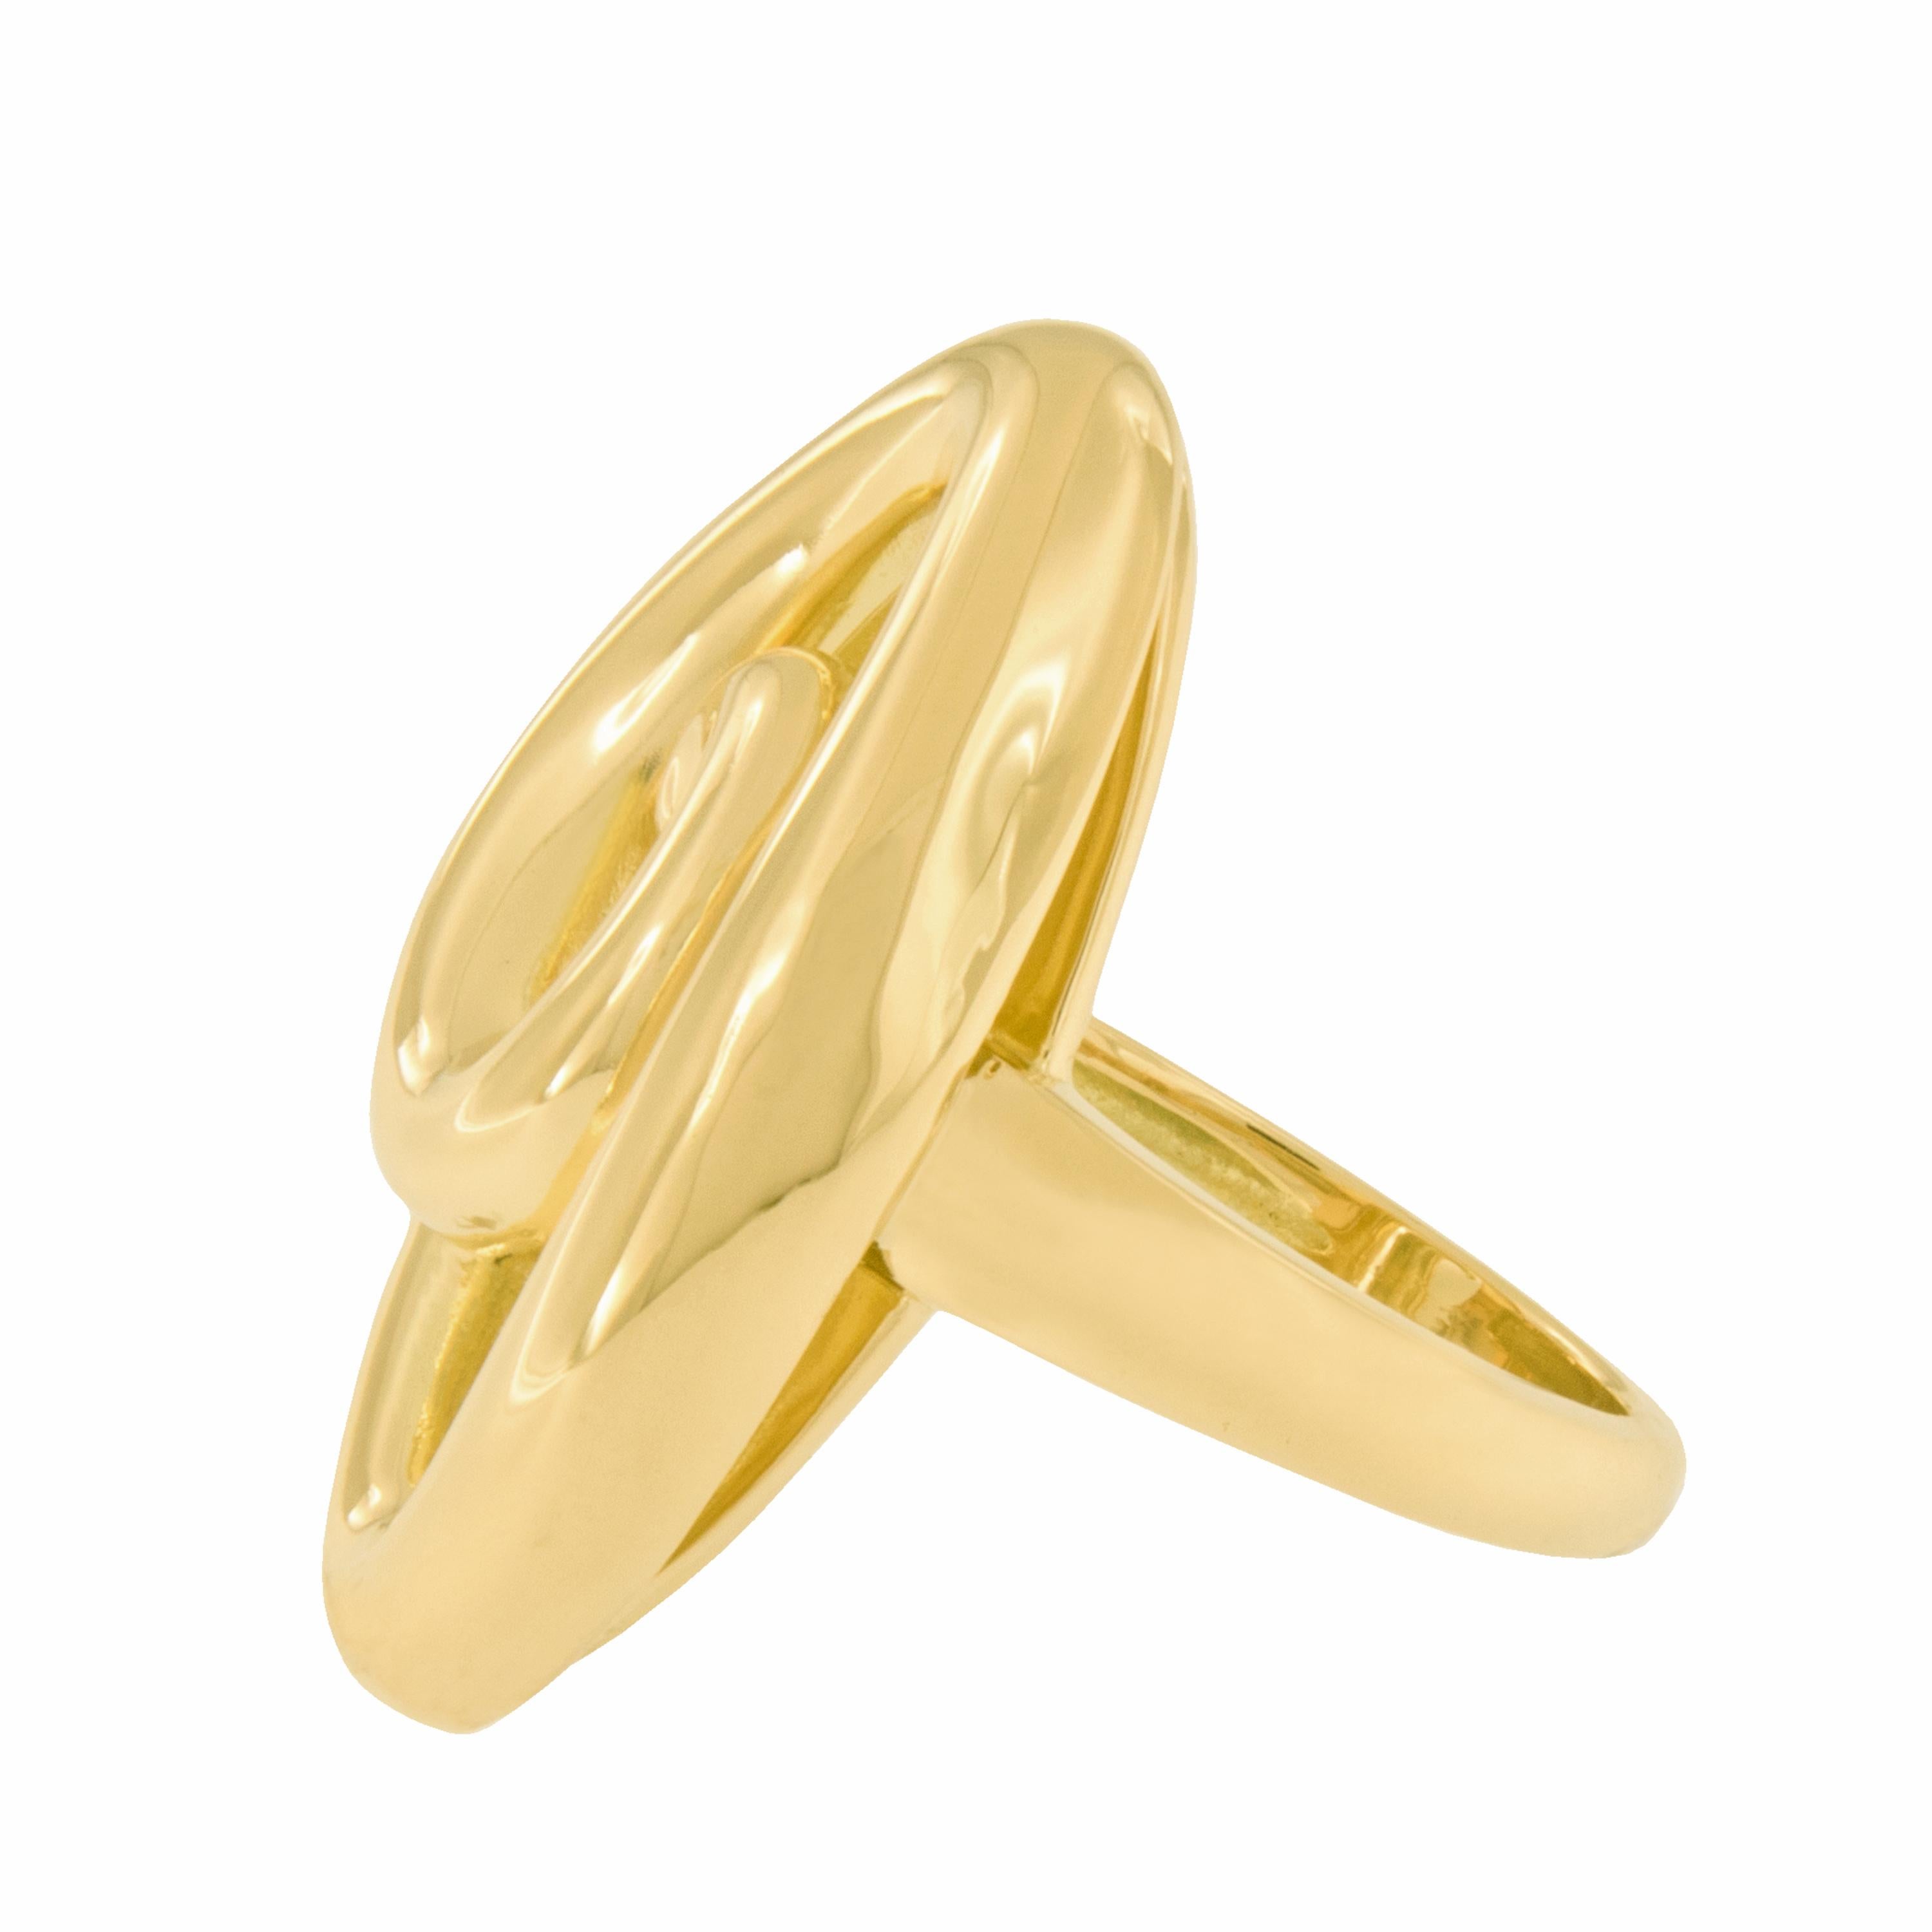 The Harmonie was the last collection designer Jean Vitau created. Named for it's harmonious, organic design this 18 karat yellow gold ring is an elegant addition to your finger. Hand made in New York, USA.
Size 6
28-17.5mm
14.1 grams